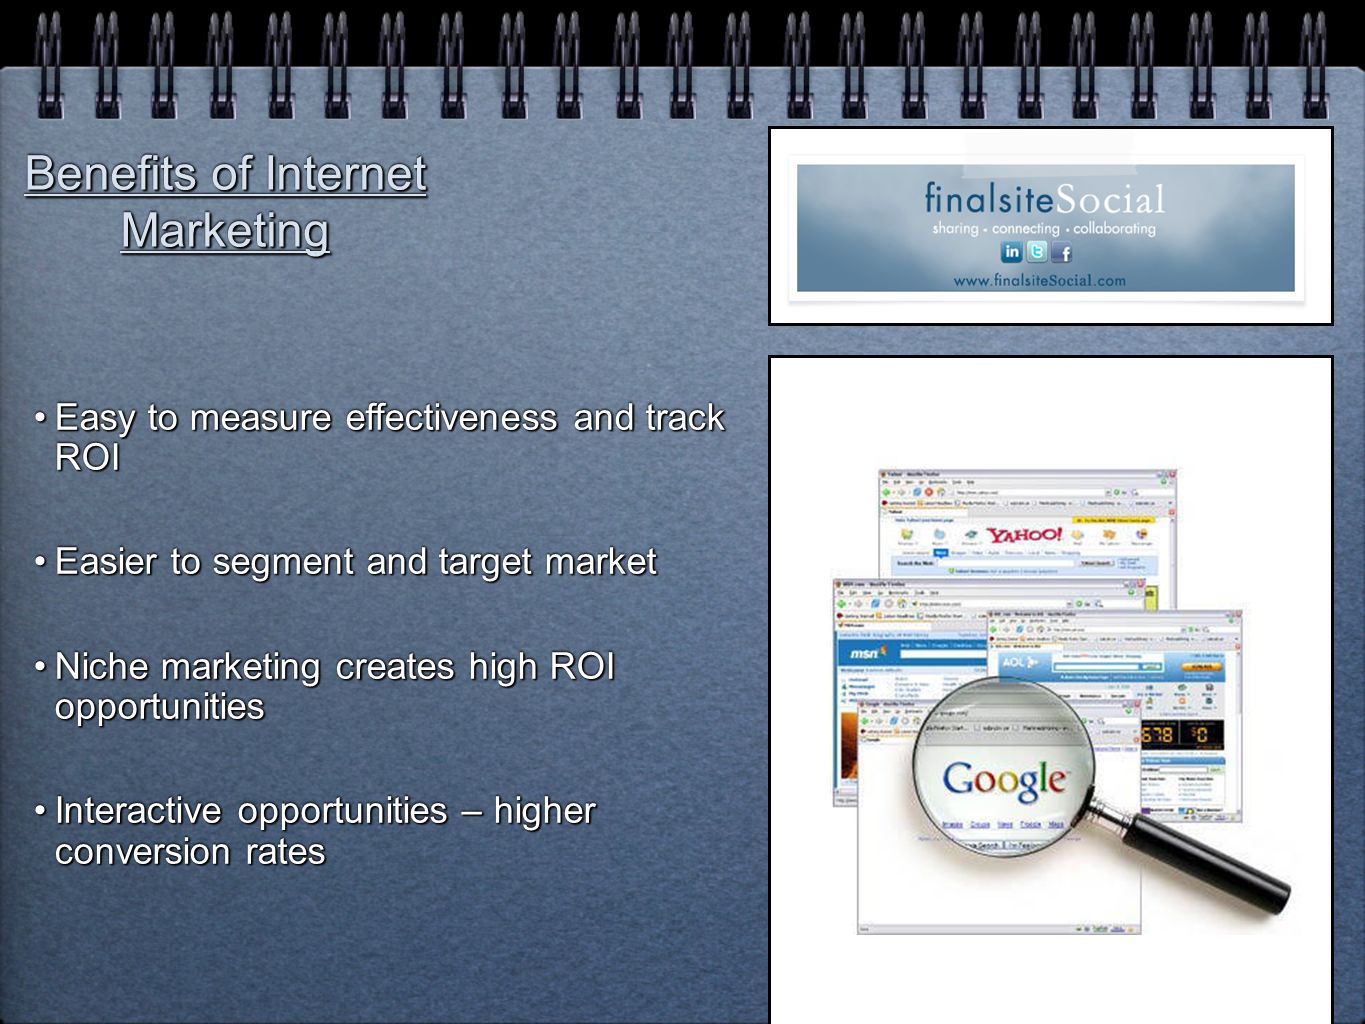 Benefits of Internet Marketing Easy to measure effectiveness and track ROIEasy to measure effectiveness and track ROI Easier to segment and target marketEasier to segment and target market Niche marketing creates high ROI opportunitiesNiche marketing creates high ROI opportunities Interactive opportunities – higher conversion ratesInteractive opportunities – higher conversion rates Easy to measure effectiveness and track ROIEasy to measure effectiveness and track ROI Easier to segment and target marketEasier to segment and target market Niche marketing creates high ROI opportunitiesNiche marketing creates high ROI opportunities Interactive opportunities – higher conversion ratesInteractive opportunities – higher conversion rates